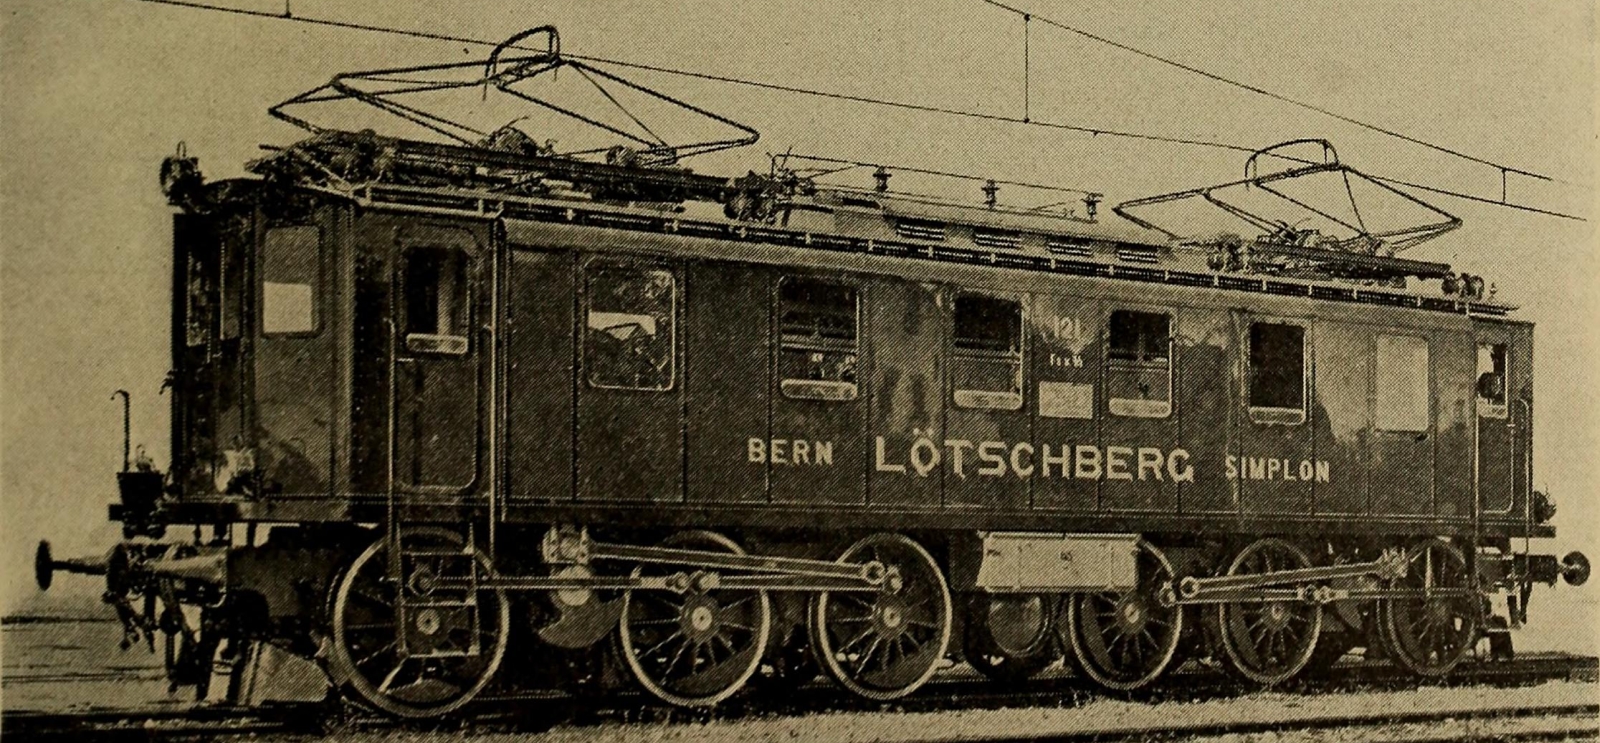 From the book “Electric traction for railway trains” from 1911